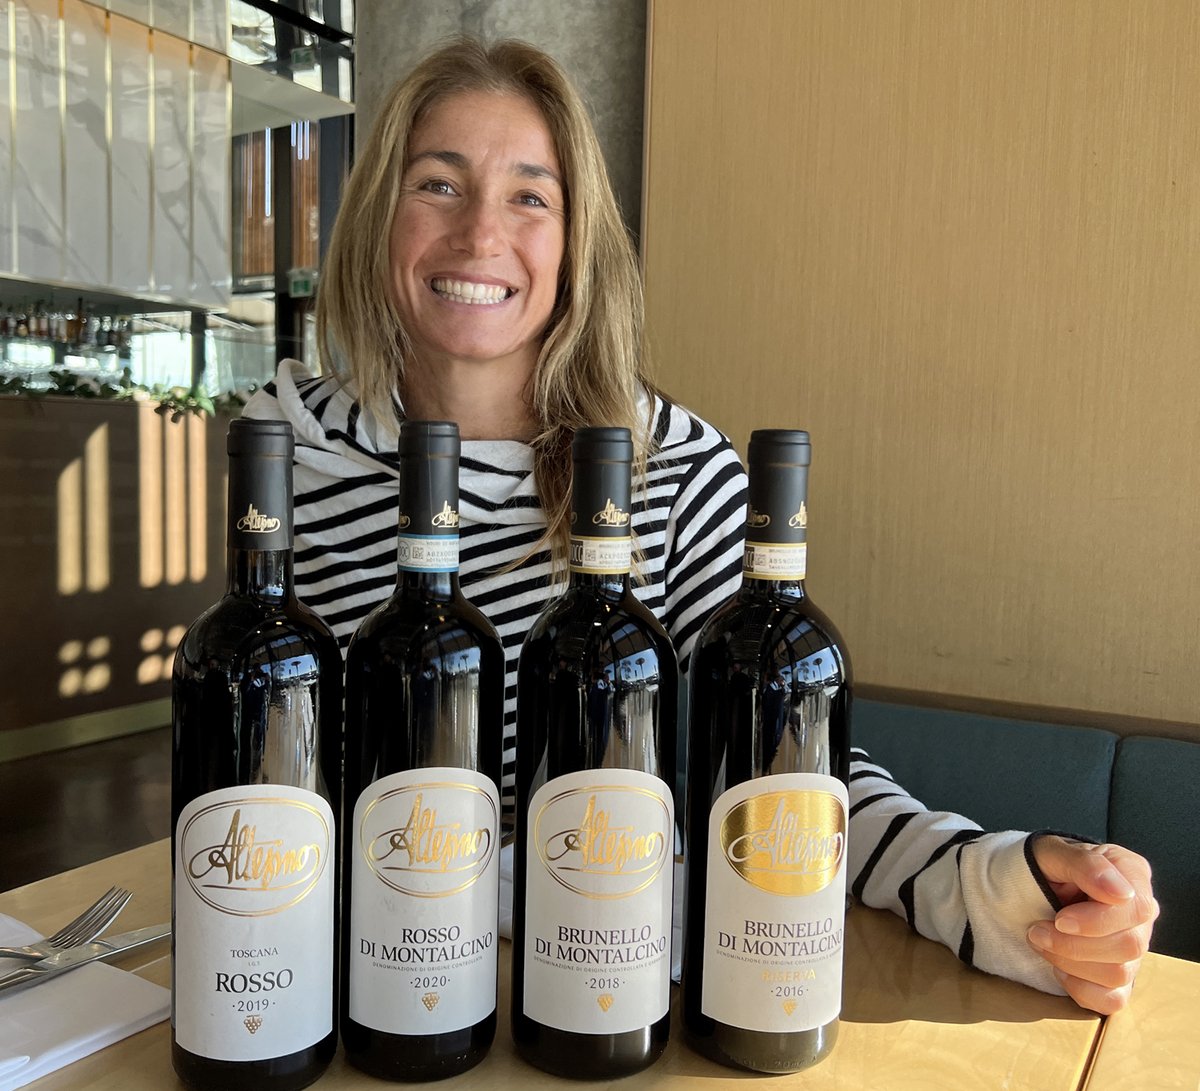 Great session with Alessandra Angelini of famed Brunello label Altesino. Angelini is as articulate and as elegant as her wines. We tasted 19 IGT Rosso, 20 Rosso di Montalcino, 18 Brunello di Montalcino and 16 Brunello di Montalcino Riserva. Notes soon at gismondionwine.com/#brunellodimon…